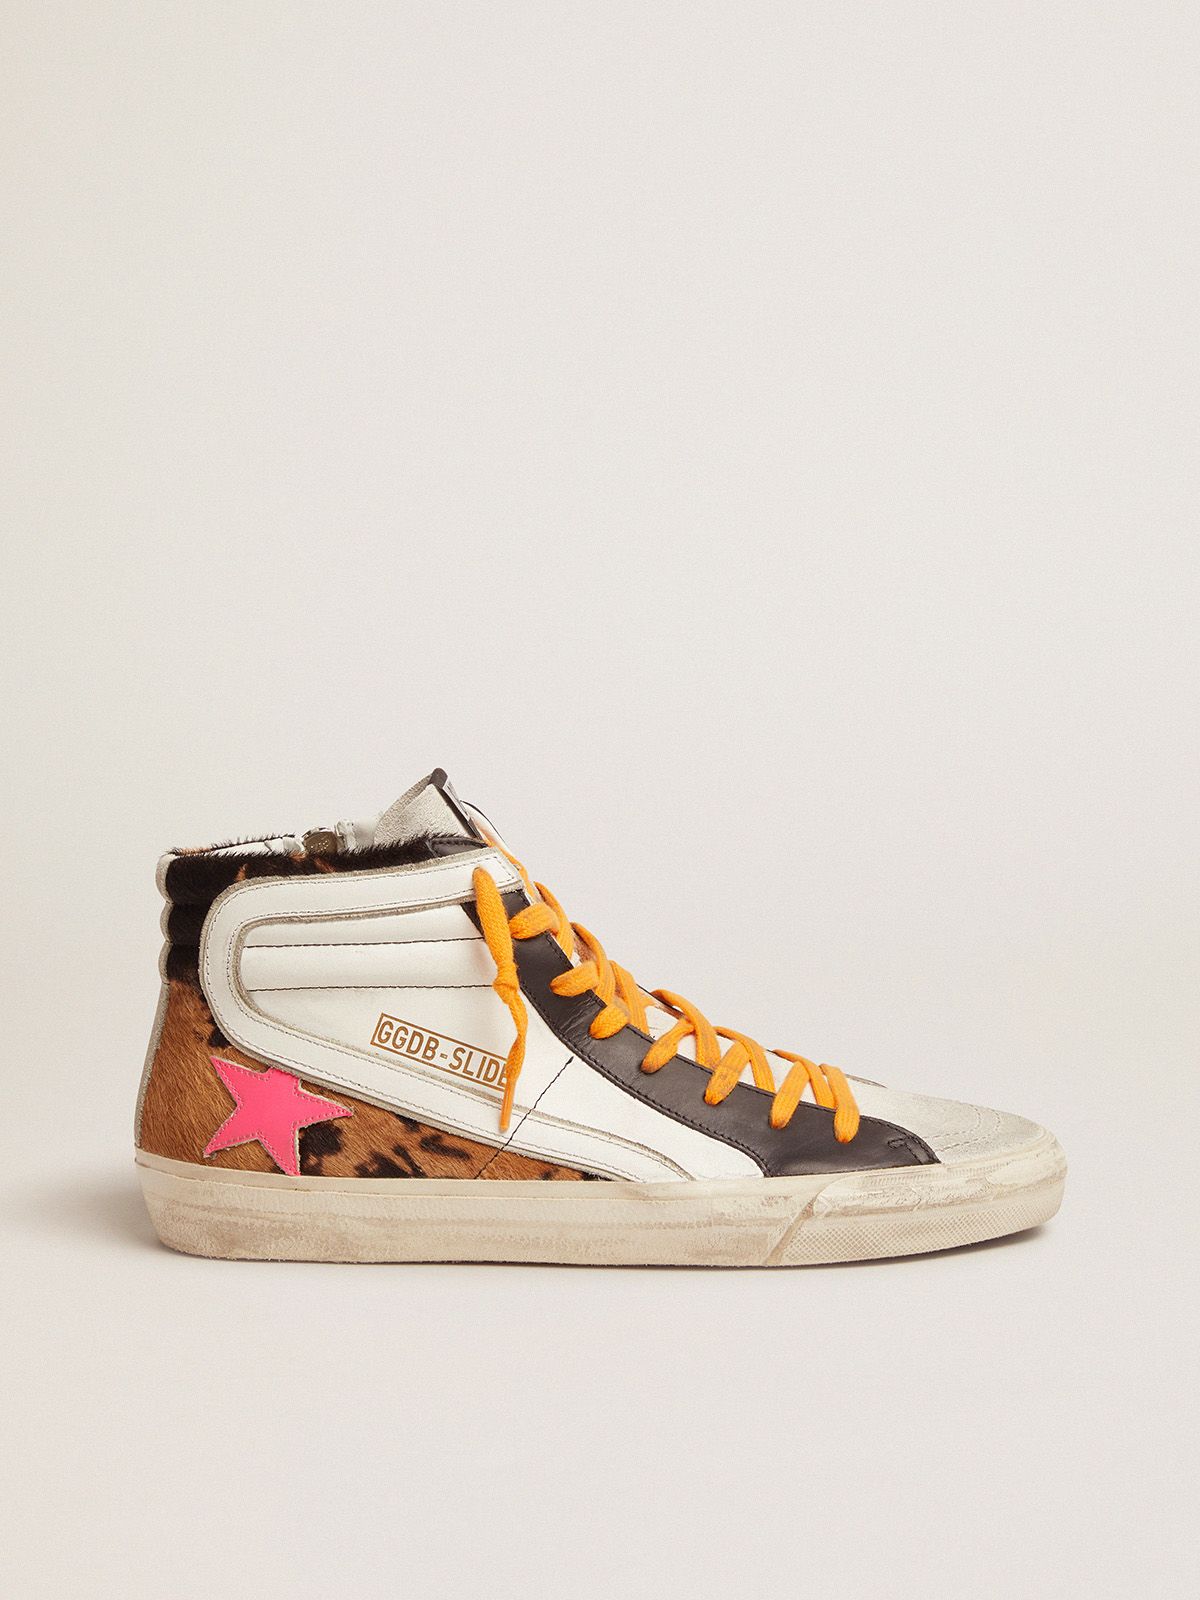 Slide sneakers in pony skin, leather and suede with orange laces and a fuchsia star